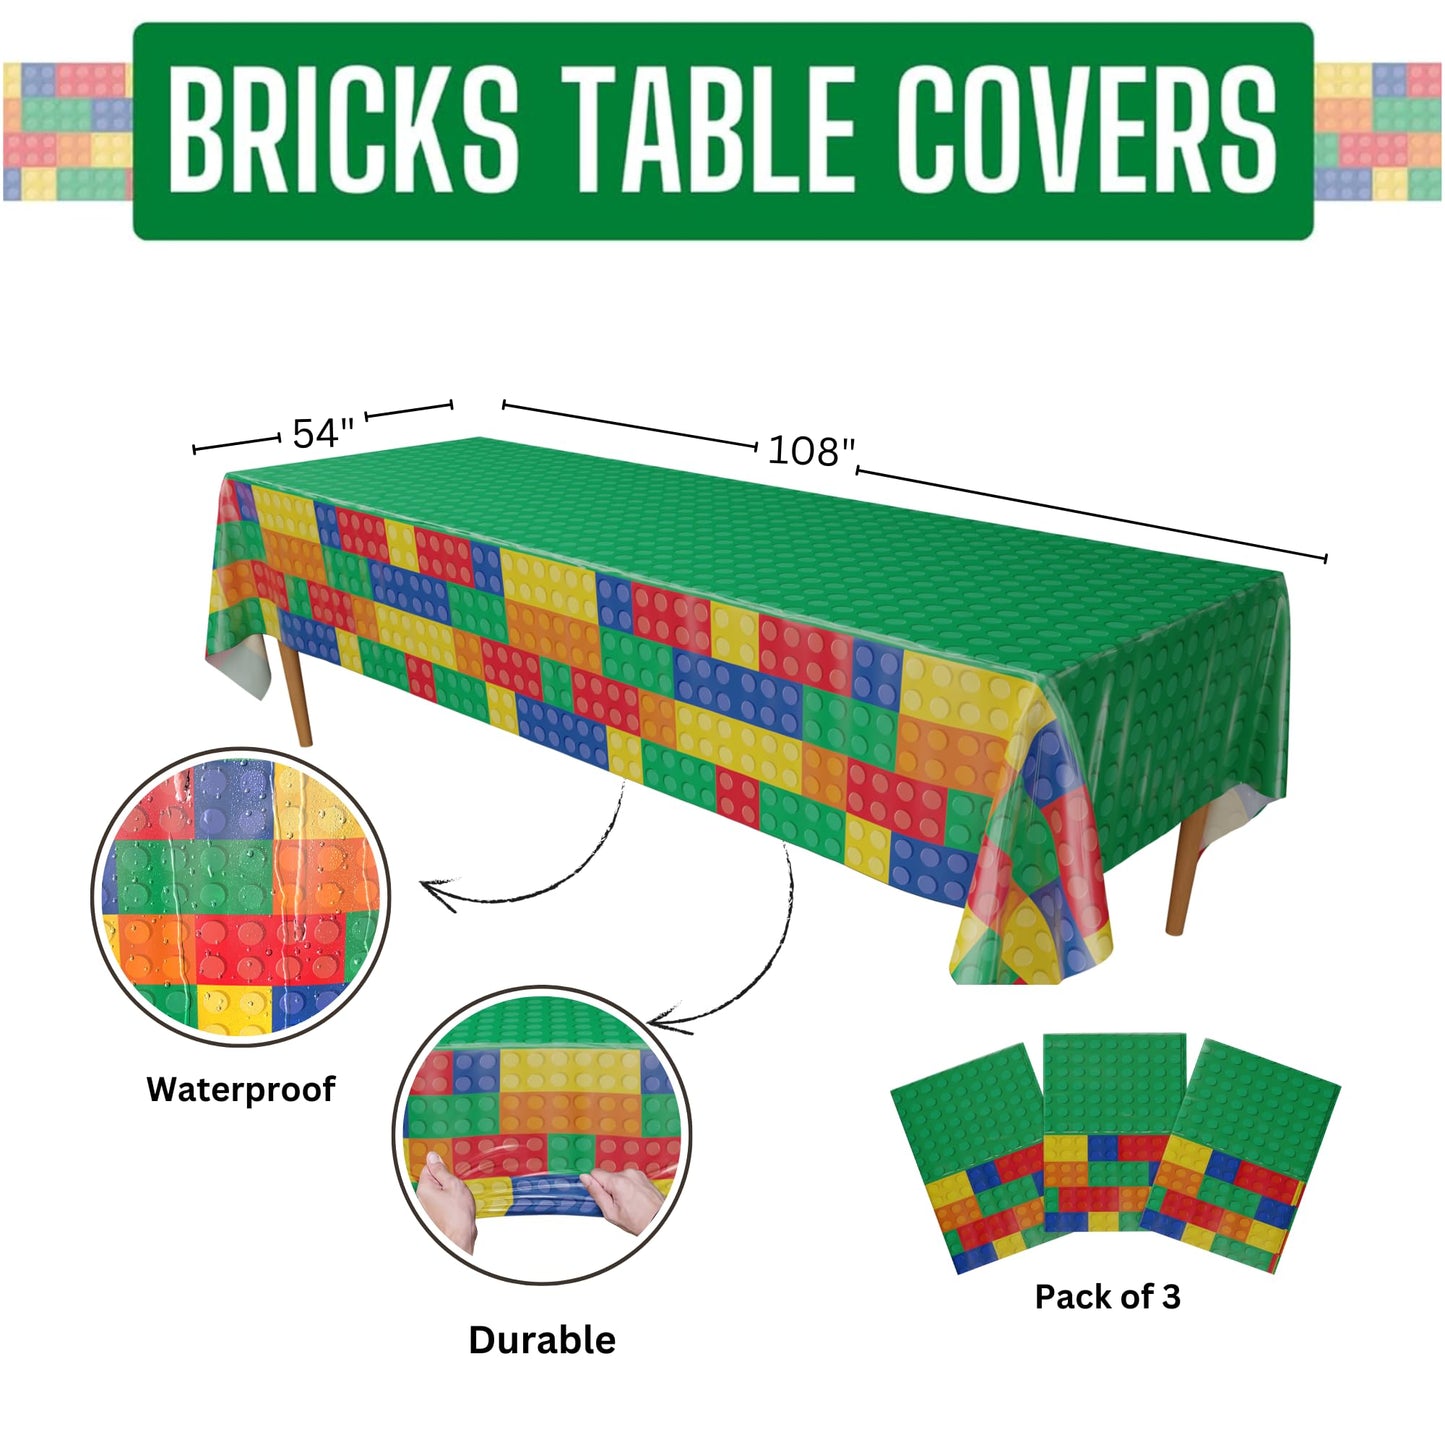 Brick Table Covers - 54in x 108in (3 Pack)